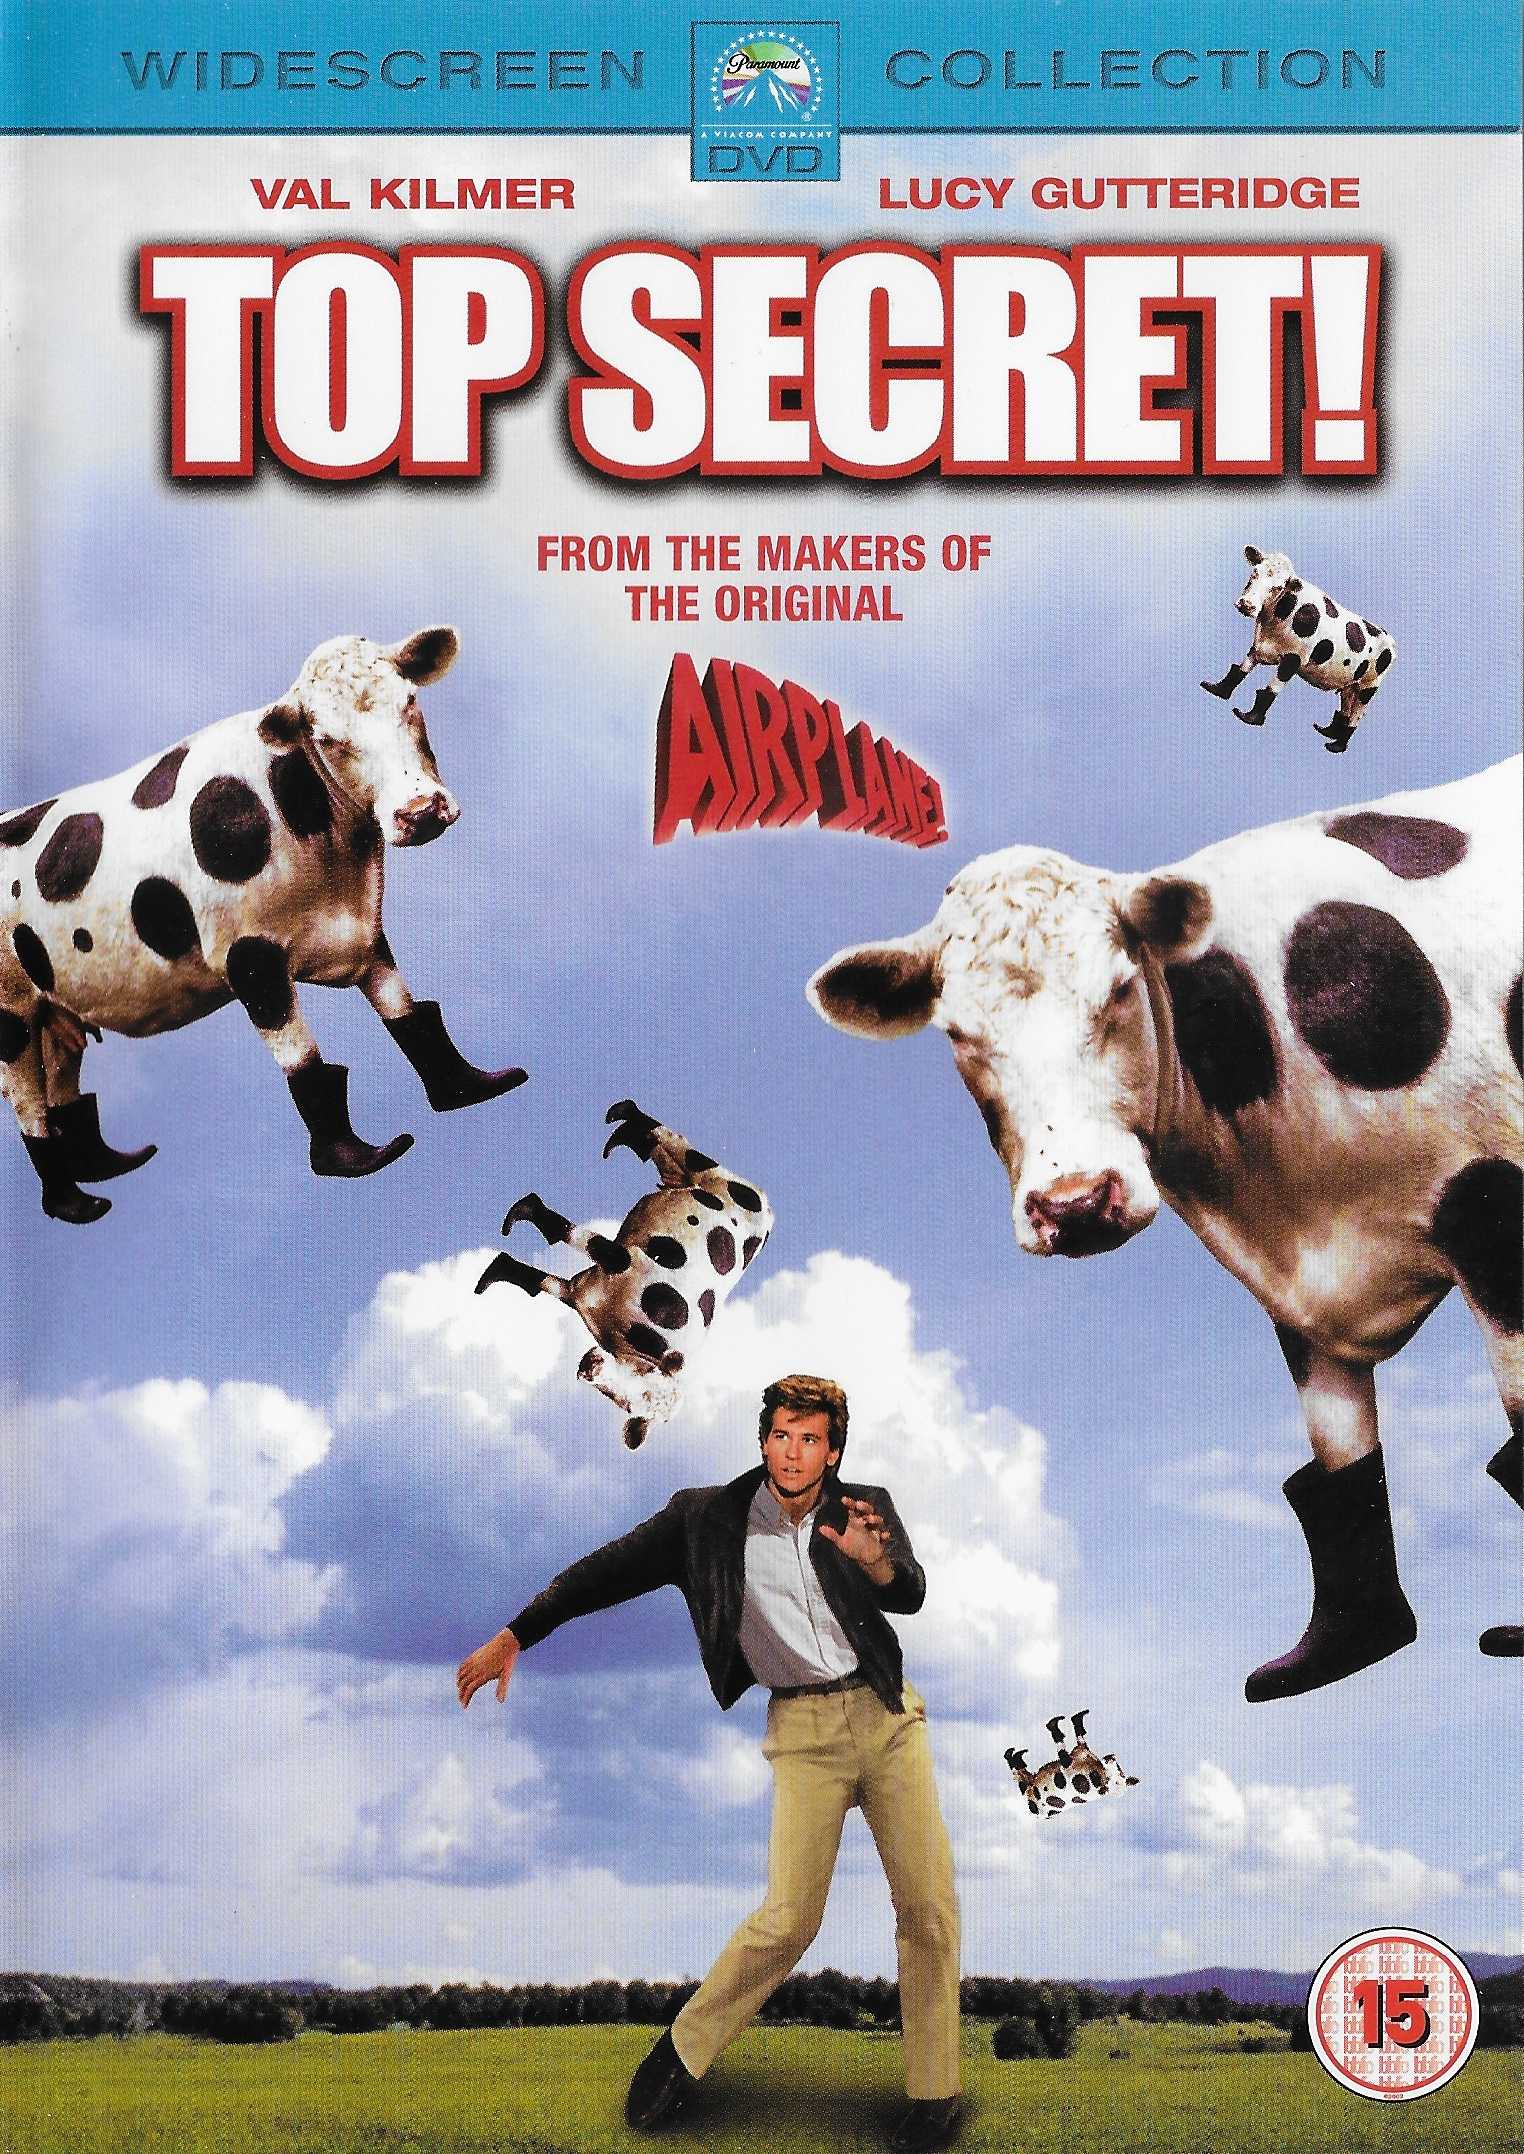 Picture of PHE 8196 Top secret! by artist Jim Abrahams / David Zucker / Jerry Zucker / Marty Burke from ITV, Channel 4 and Channel 5 dvds library